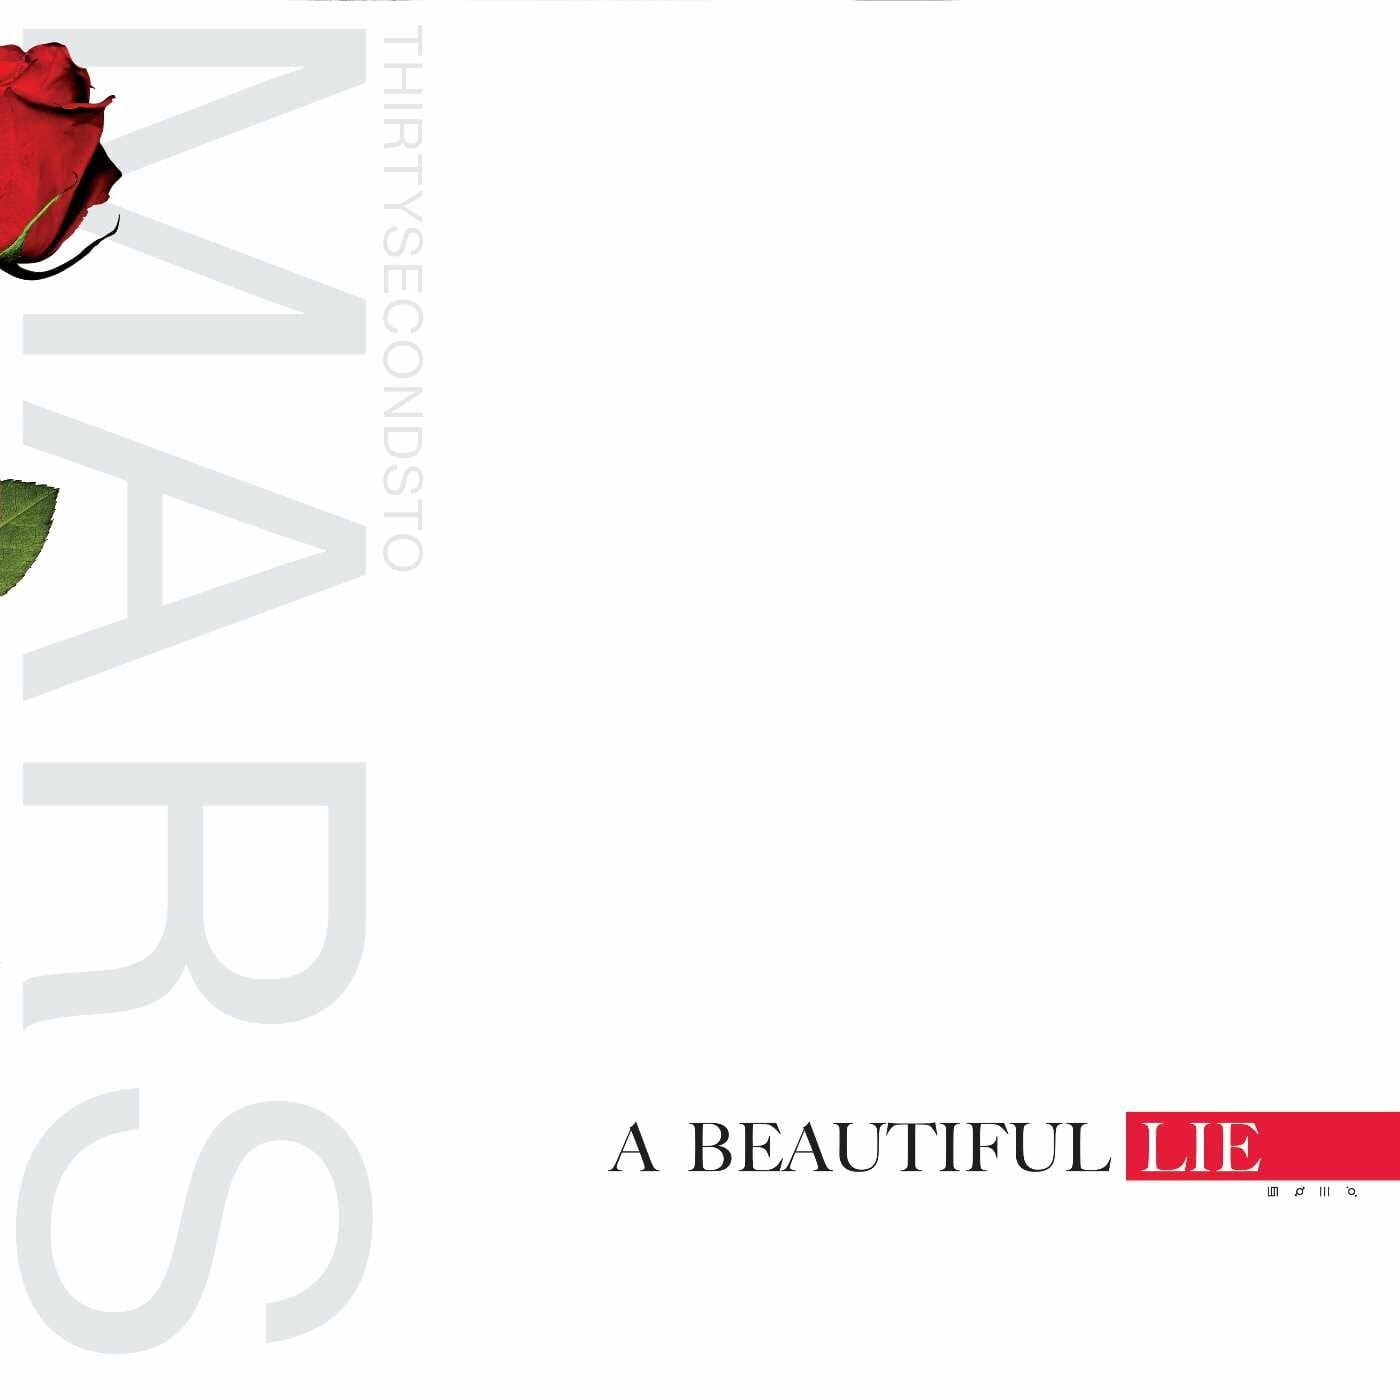 30 Seconds To Mars - "Beautiful Lie"